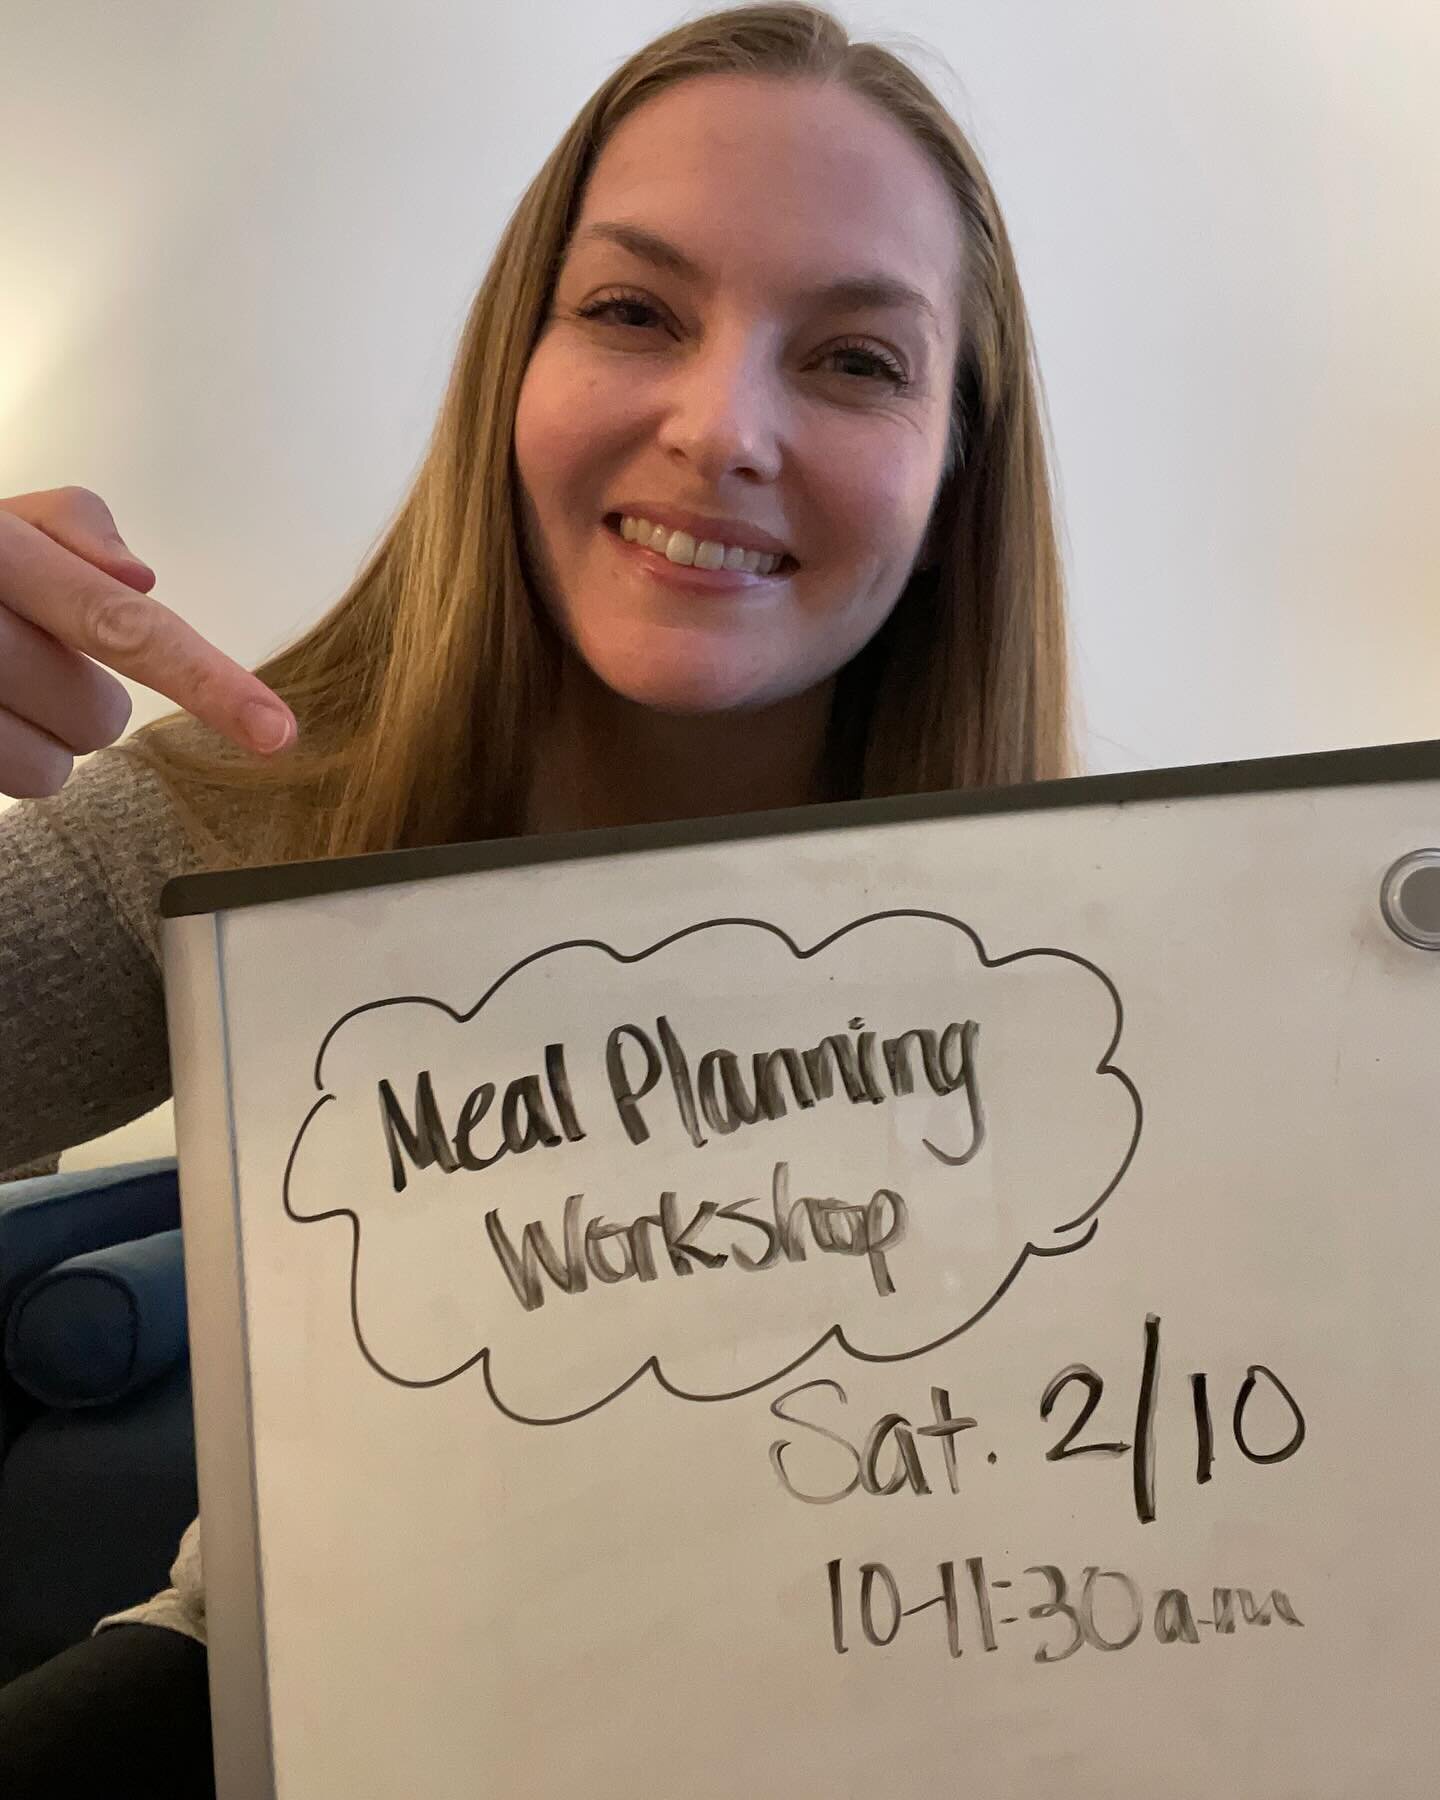 This workshop will help you brainstorm different methods of meal planning, and you&rsquo;ll leave with a one-week menu for your household. 📝

Join us at my office on Saturday, Feb. 10 from 10-11:30 a.m.

Register by sending $35 via Venmo @FoodFreedo